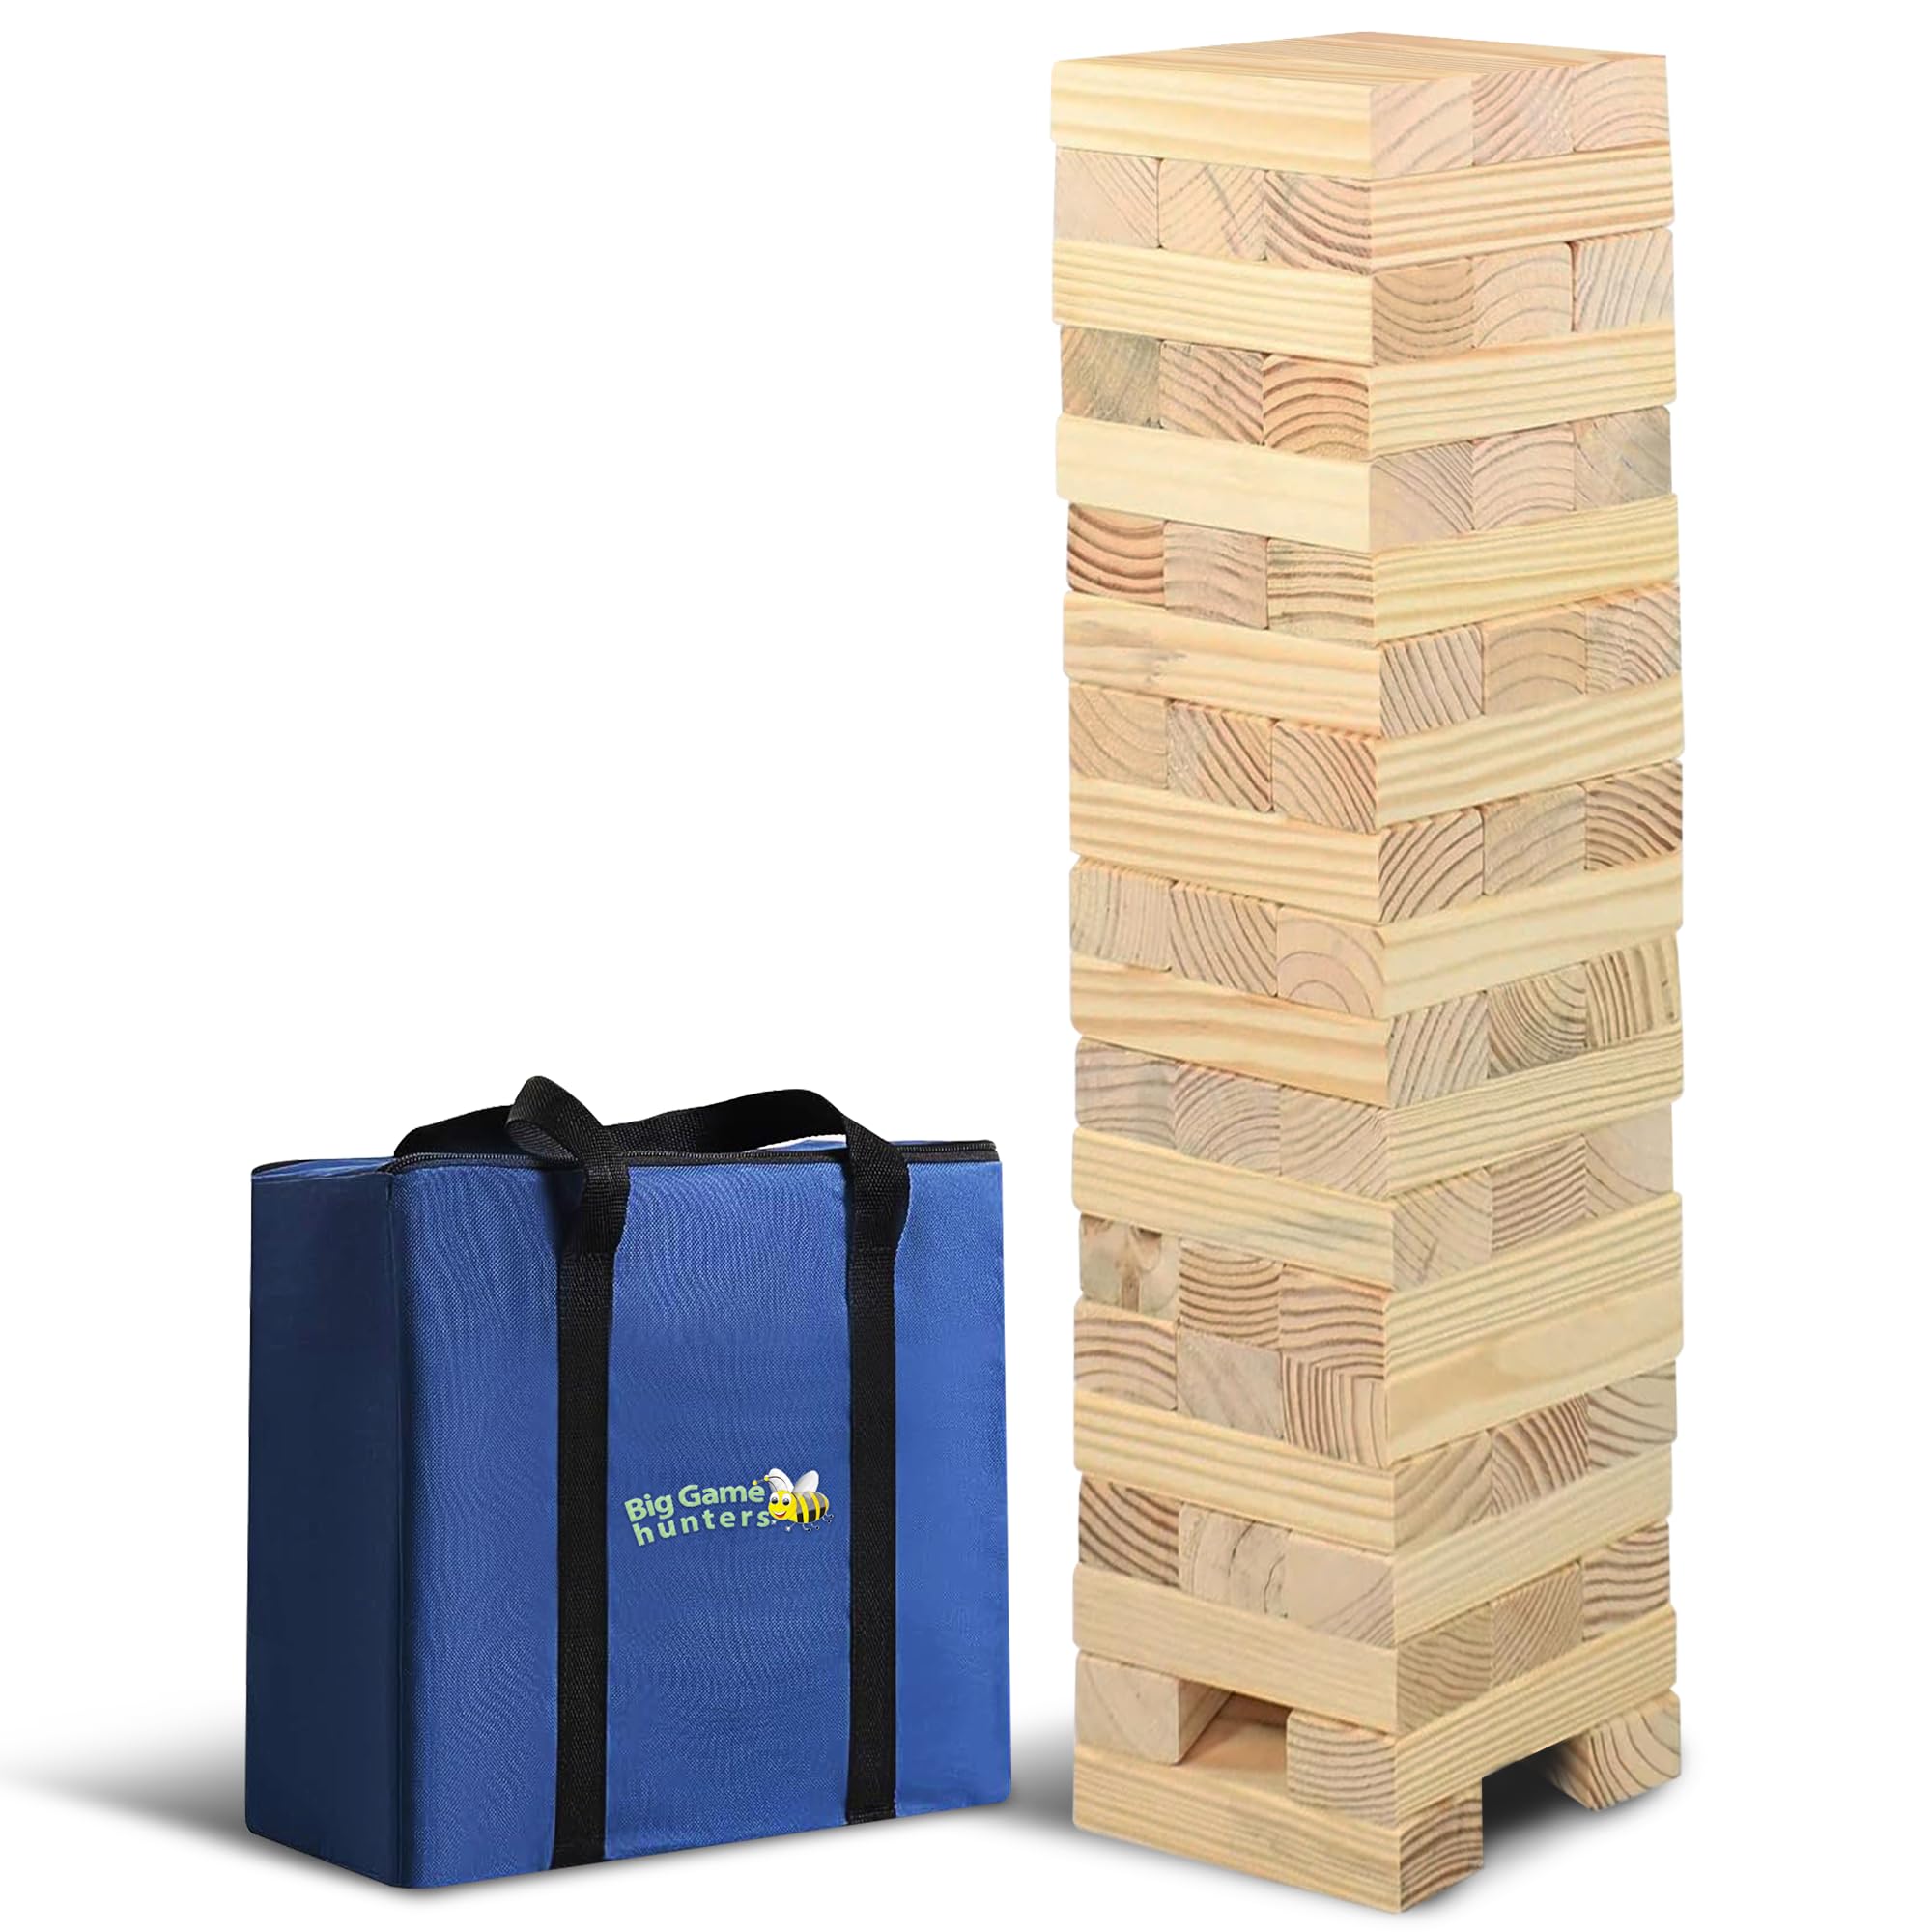 Garden Games Big Game Hunters Giant Tumble Towers, 58 Piece Wooden Block Game, 5 ft. Tall Stacking Backyard Indoor Outdoor Game for Kids Adul